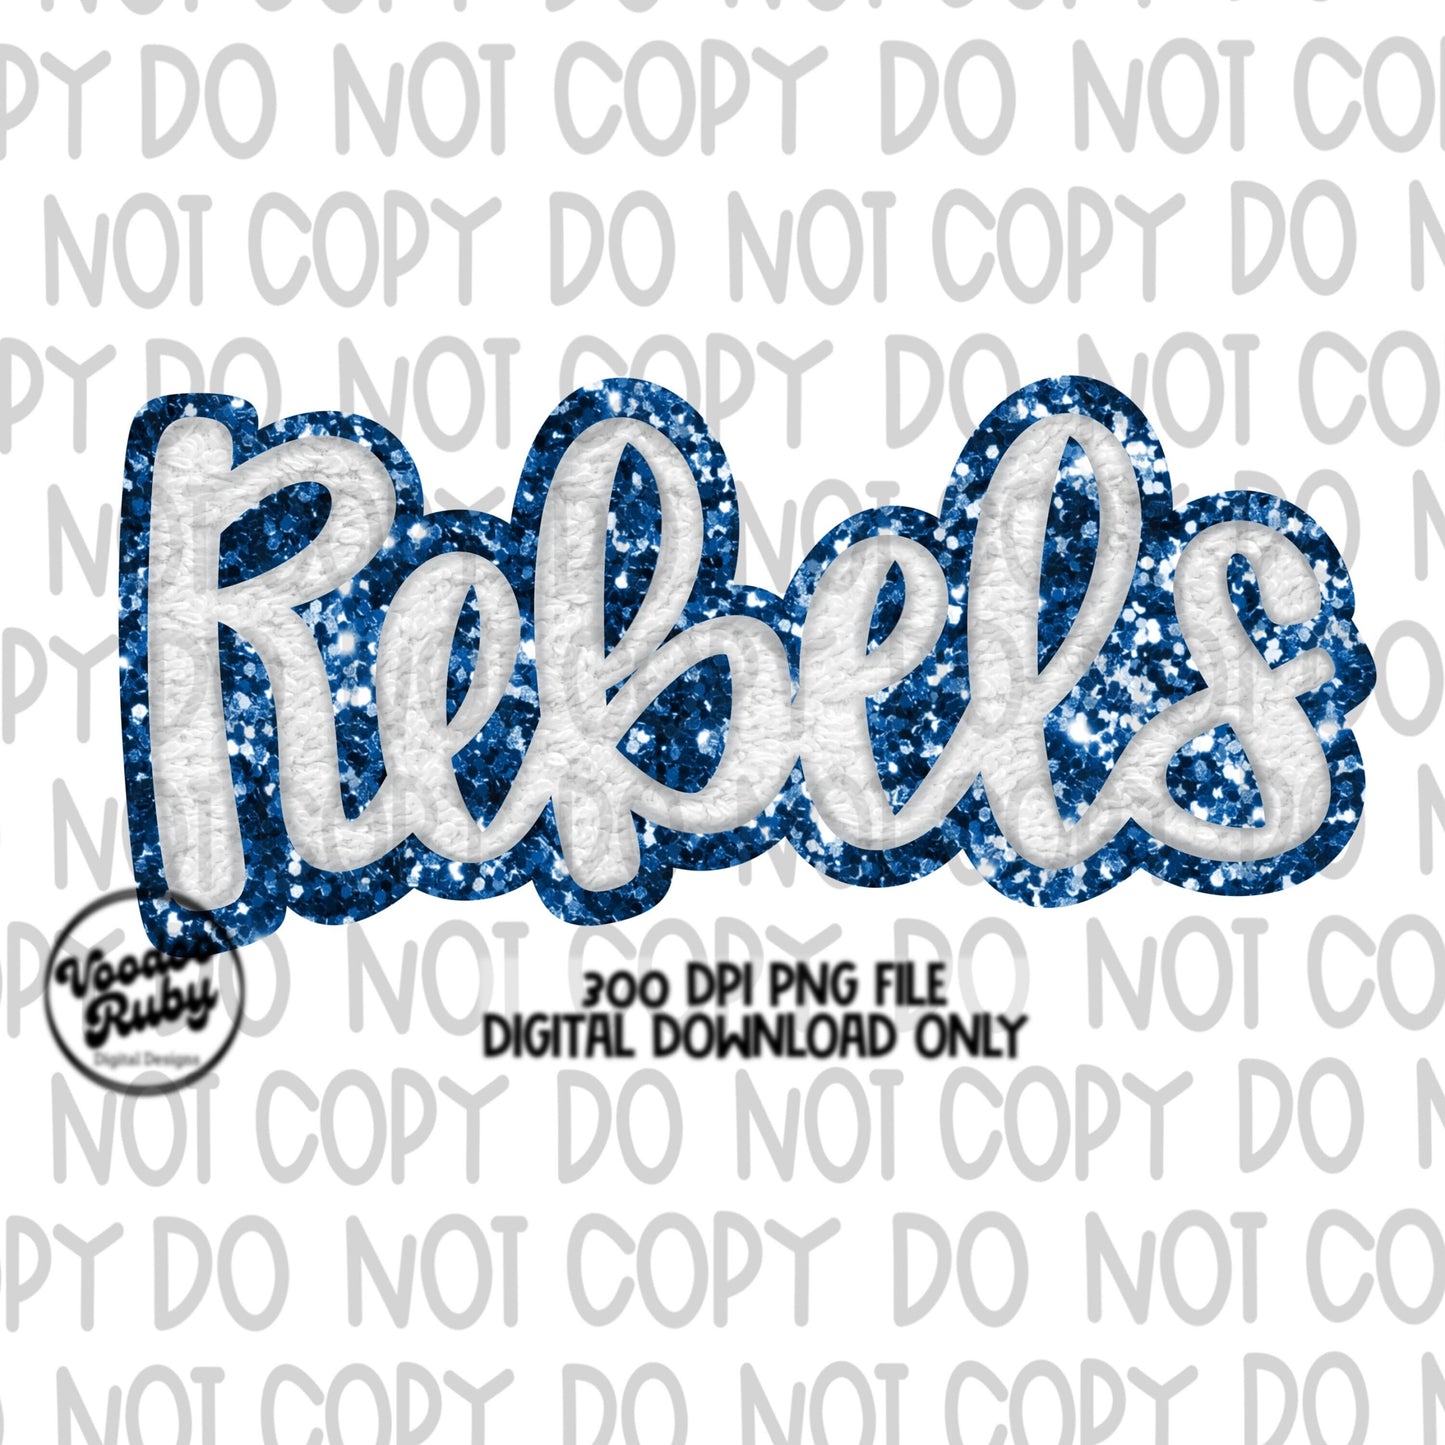 Rebels mascot png design in white faux chenille and blue faux glitter background. High resolution perfect for sublimation and dtf printing.